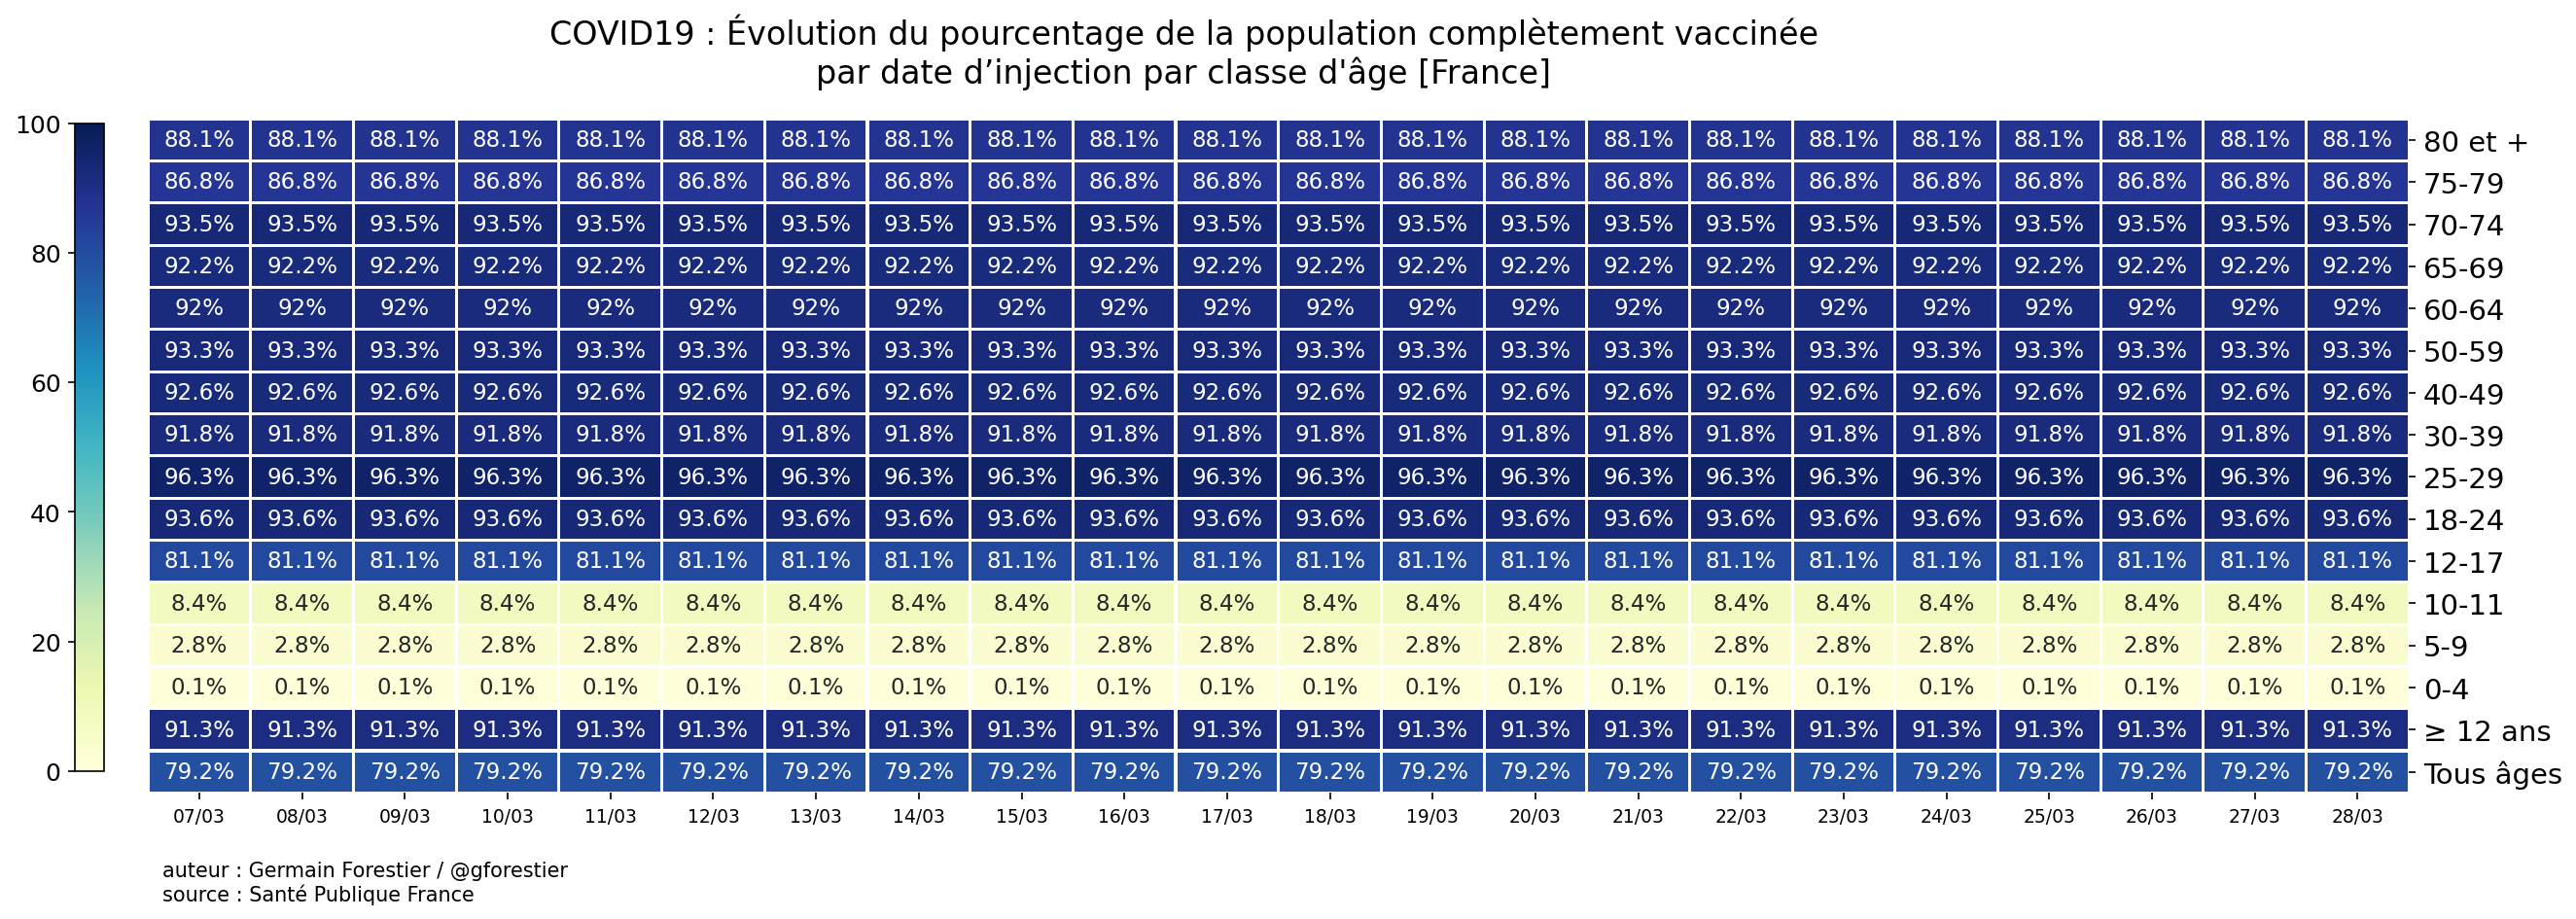 France-vaccin-si-clage-pct-complet.png